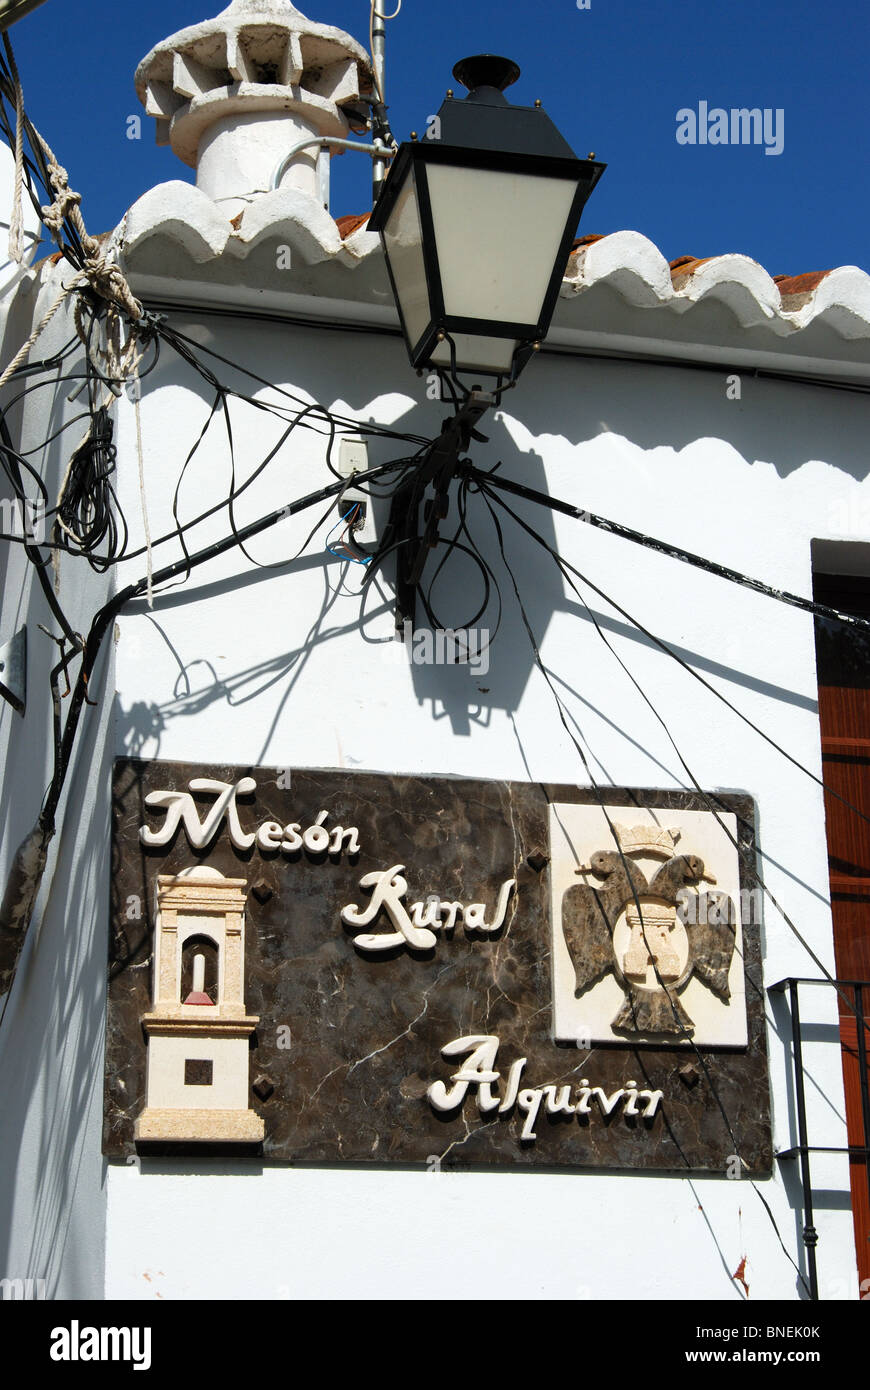 Traditional lantern and wiring, Macharaviaya, Costa del Sol, Malaga Province, Andalucia, Spain, Western Europe. Stock Photo